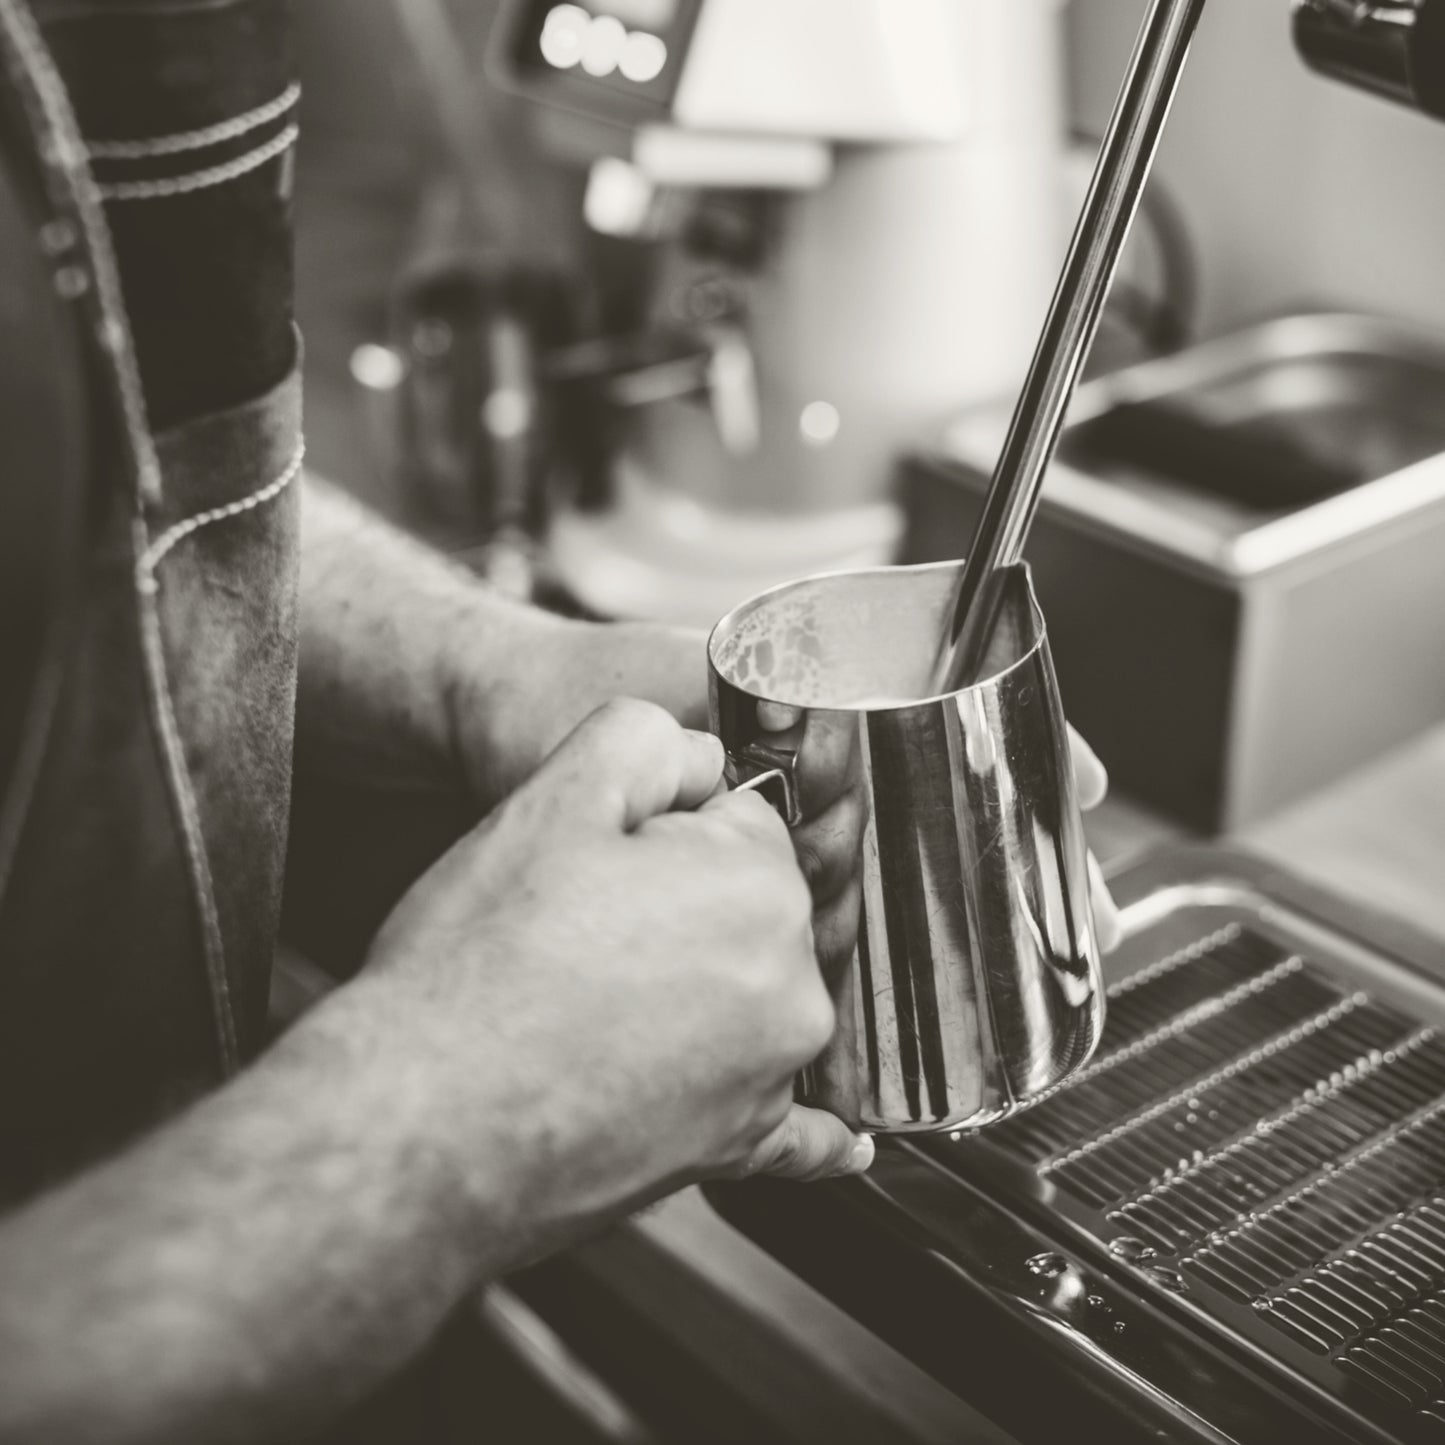 Practice Class for Barista Level 2 - Online